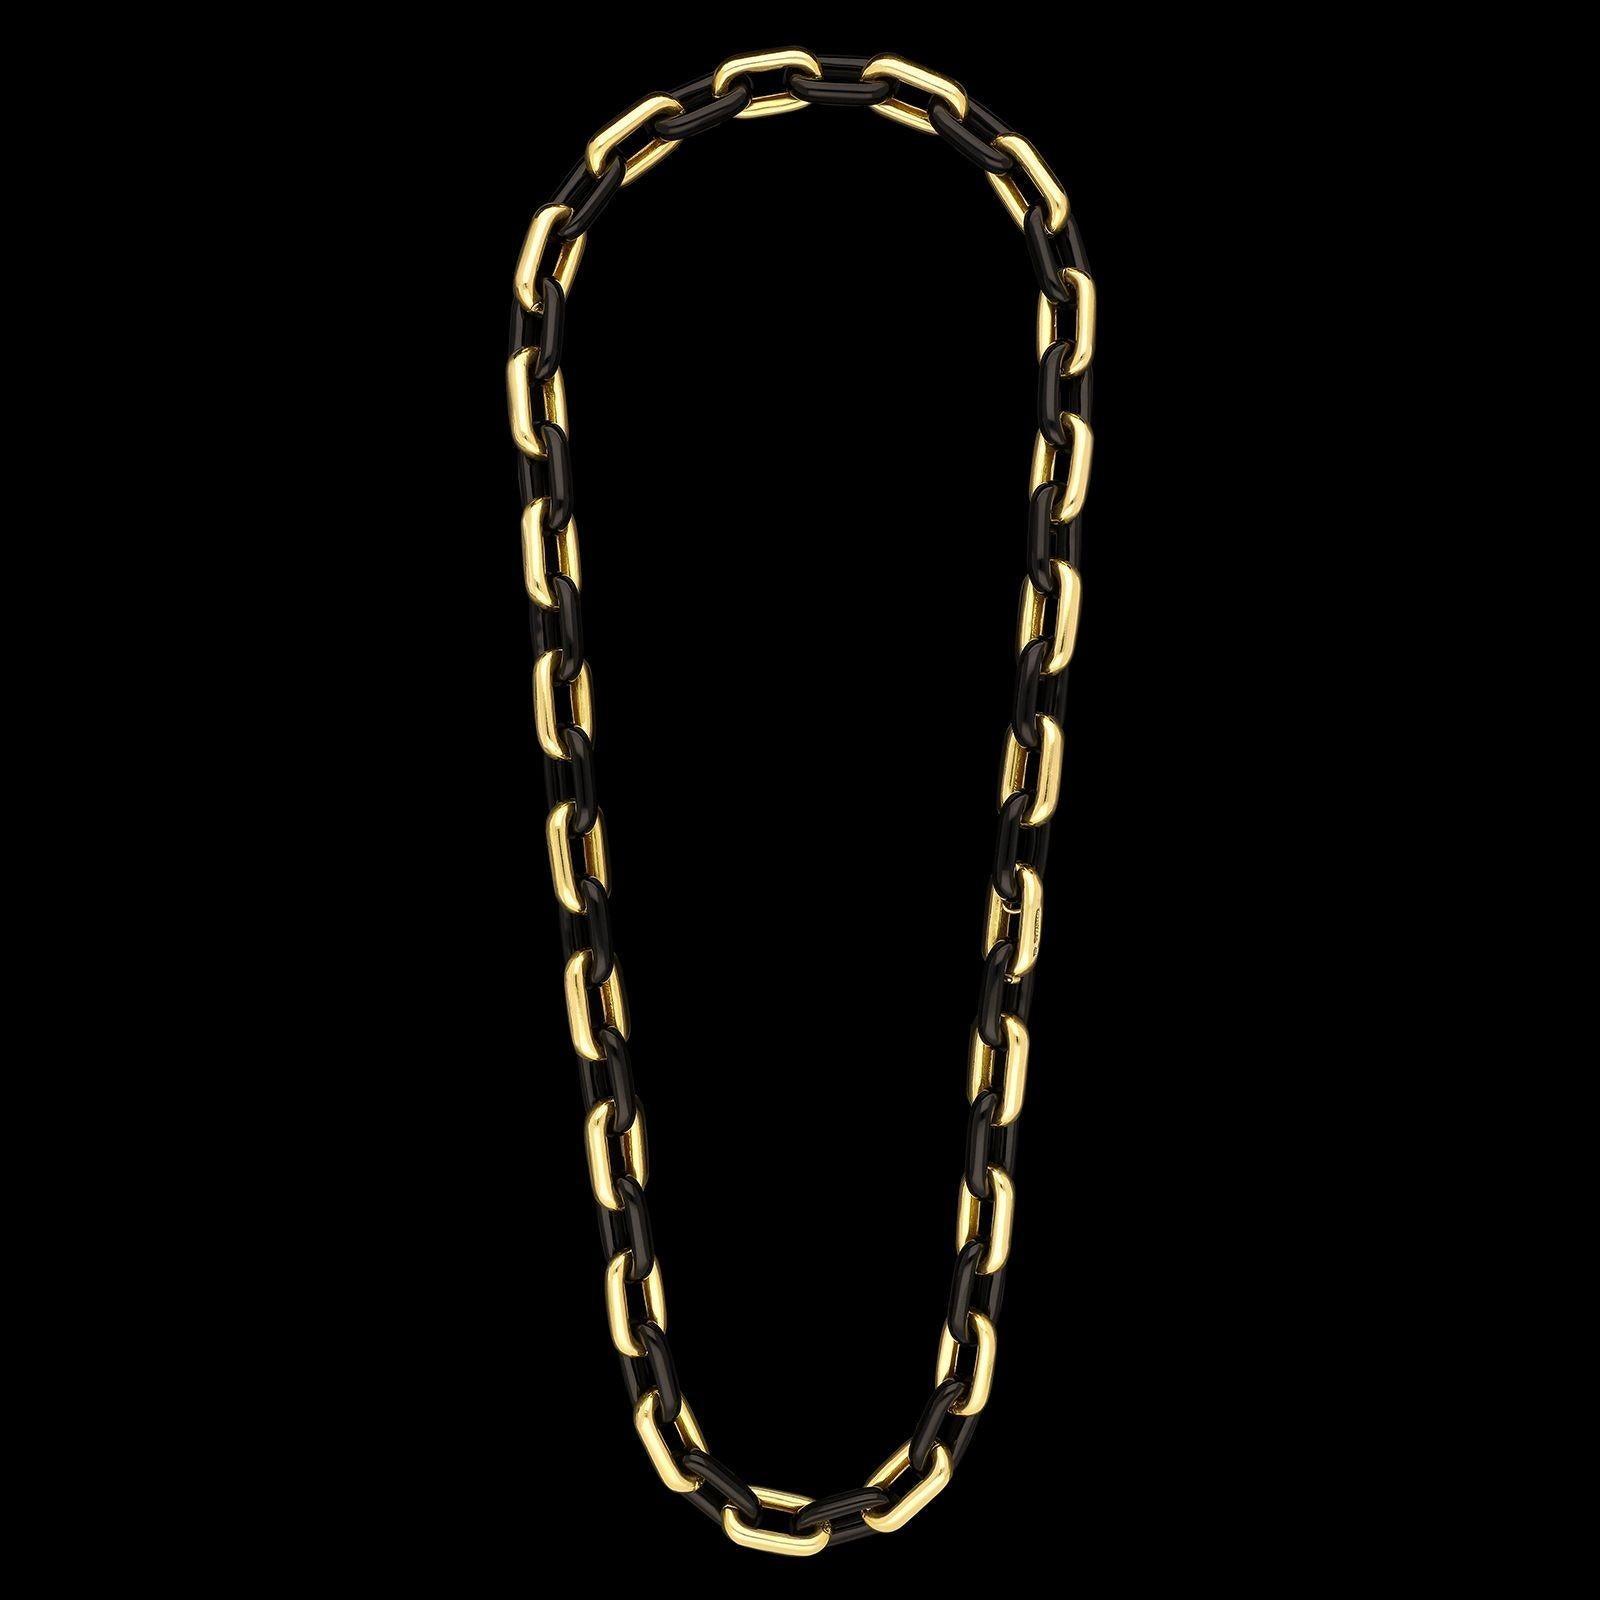 A bold 18ct gold and black onyx long chain sautoir necklace by Tiffany & Co. circa 1970s, designed as a 31” long chain formed of large rounded rectangular links of 18ct yellow gold alternating with the same size and shape of link in black onyx, to a